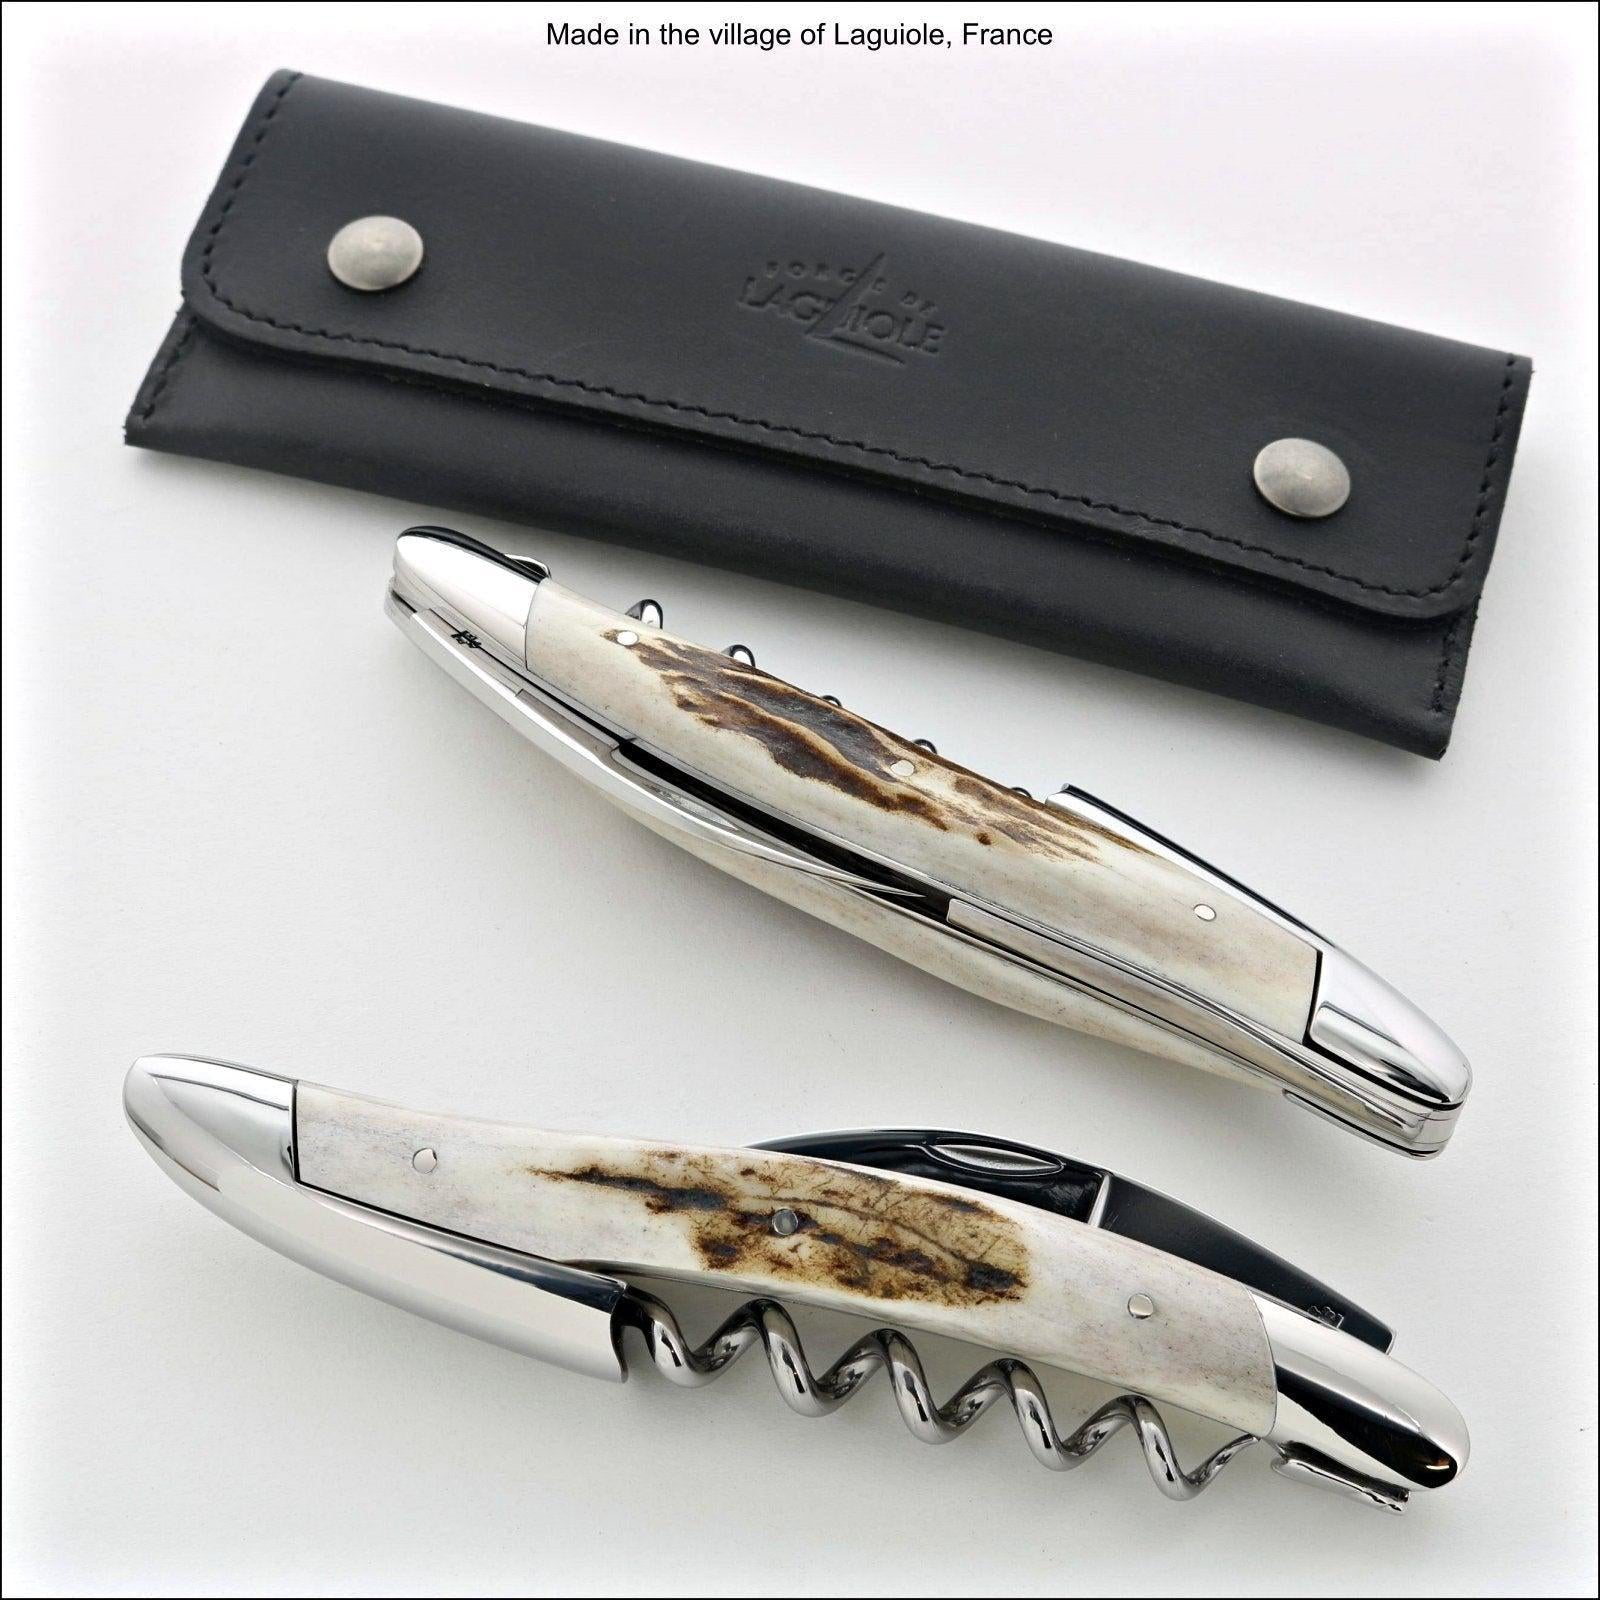 Laguiole pocket knife with Ebony Wood handle and brass bolsters, corkscrew